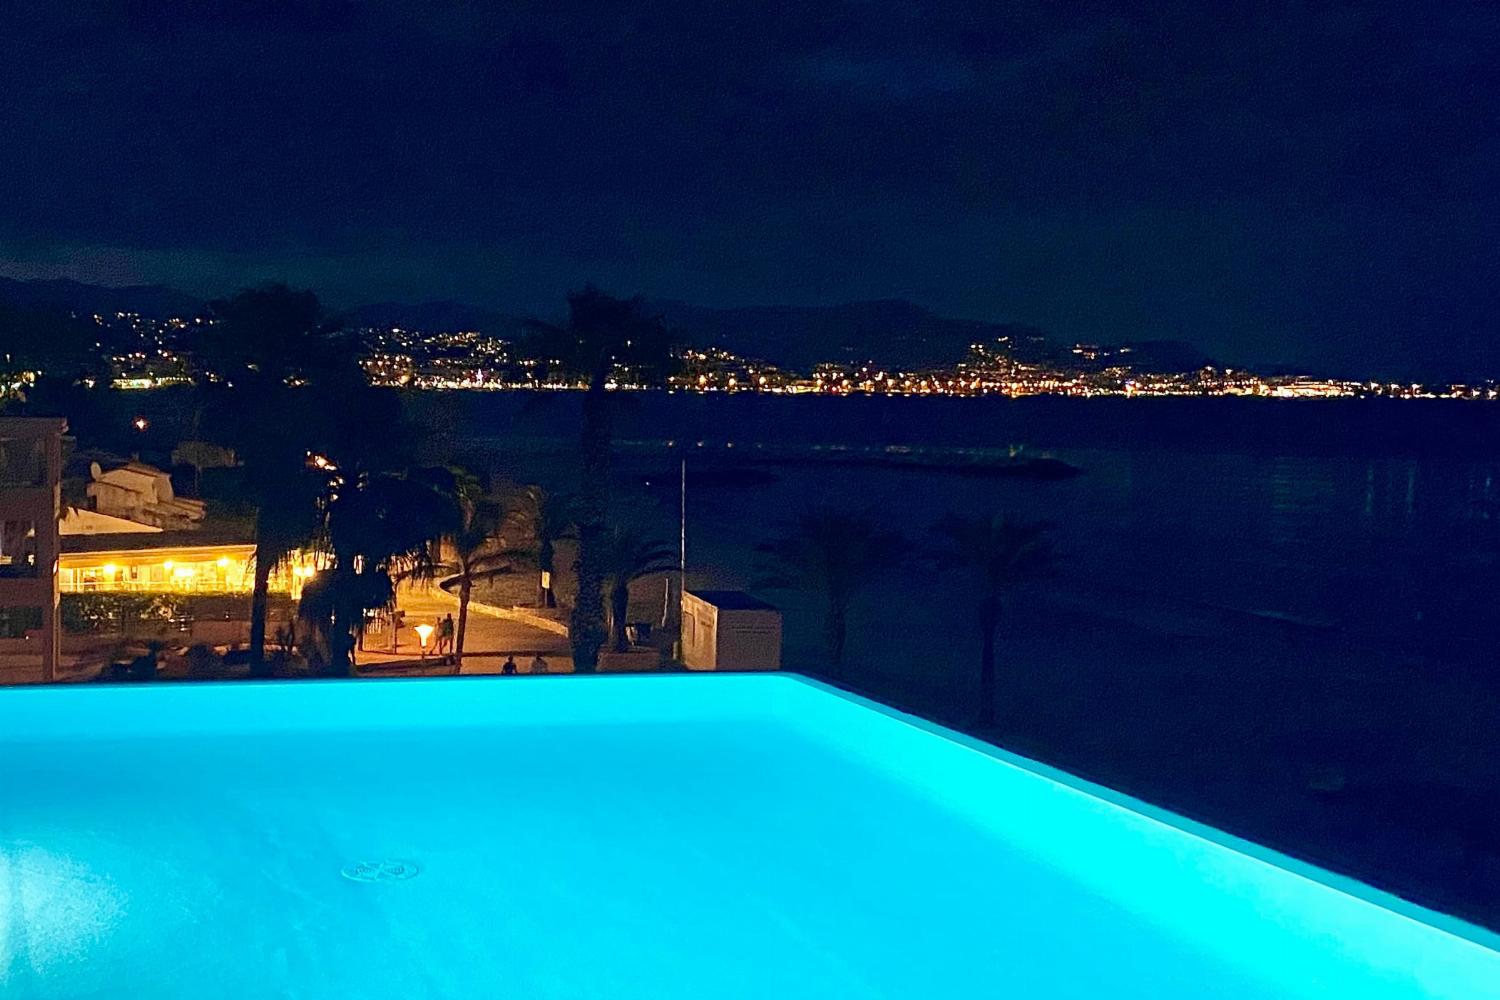 Shared pool with sea view at night